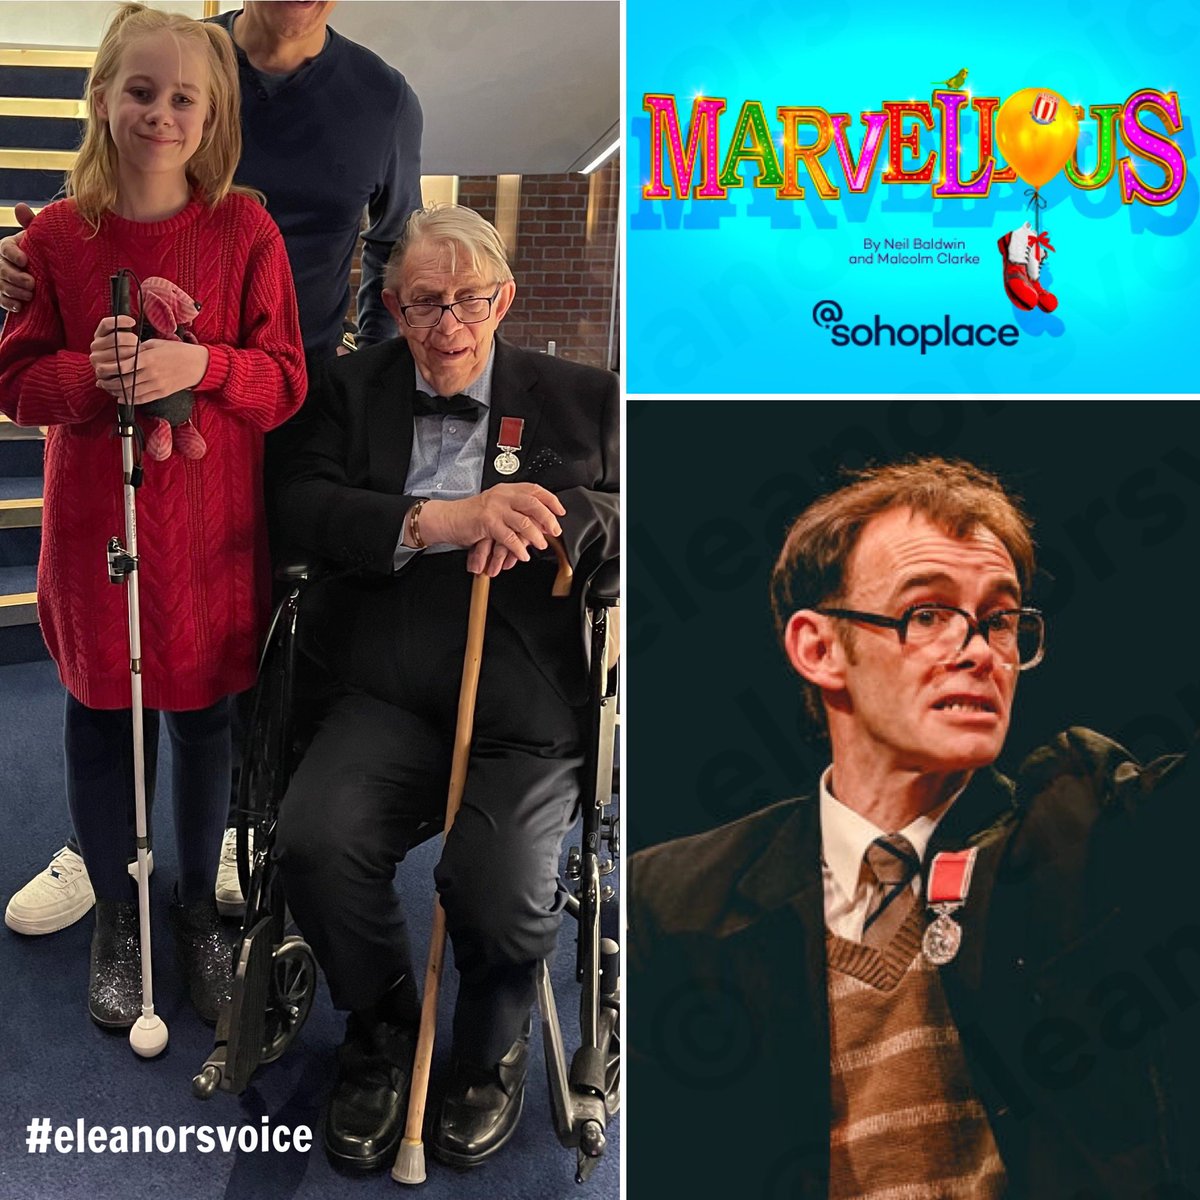 What an honour to meet THE @NelloBaldwin last night @sohoplacelondon debut show #MARVELLOUS. Thanks to @MousetrapTP & @VocalEyesAD. Michael Hugo & cast tell this life affirming & inspiring story so amazingly well. Highly recommend this one! #BeMoreNeil #BeHappy #eleanorsvoice 🤩